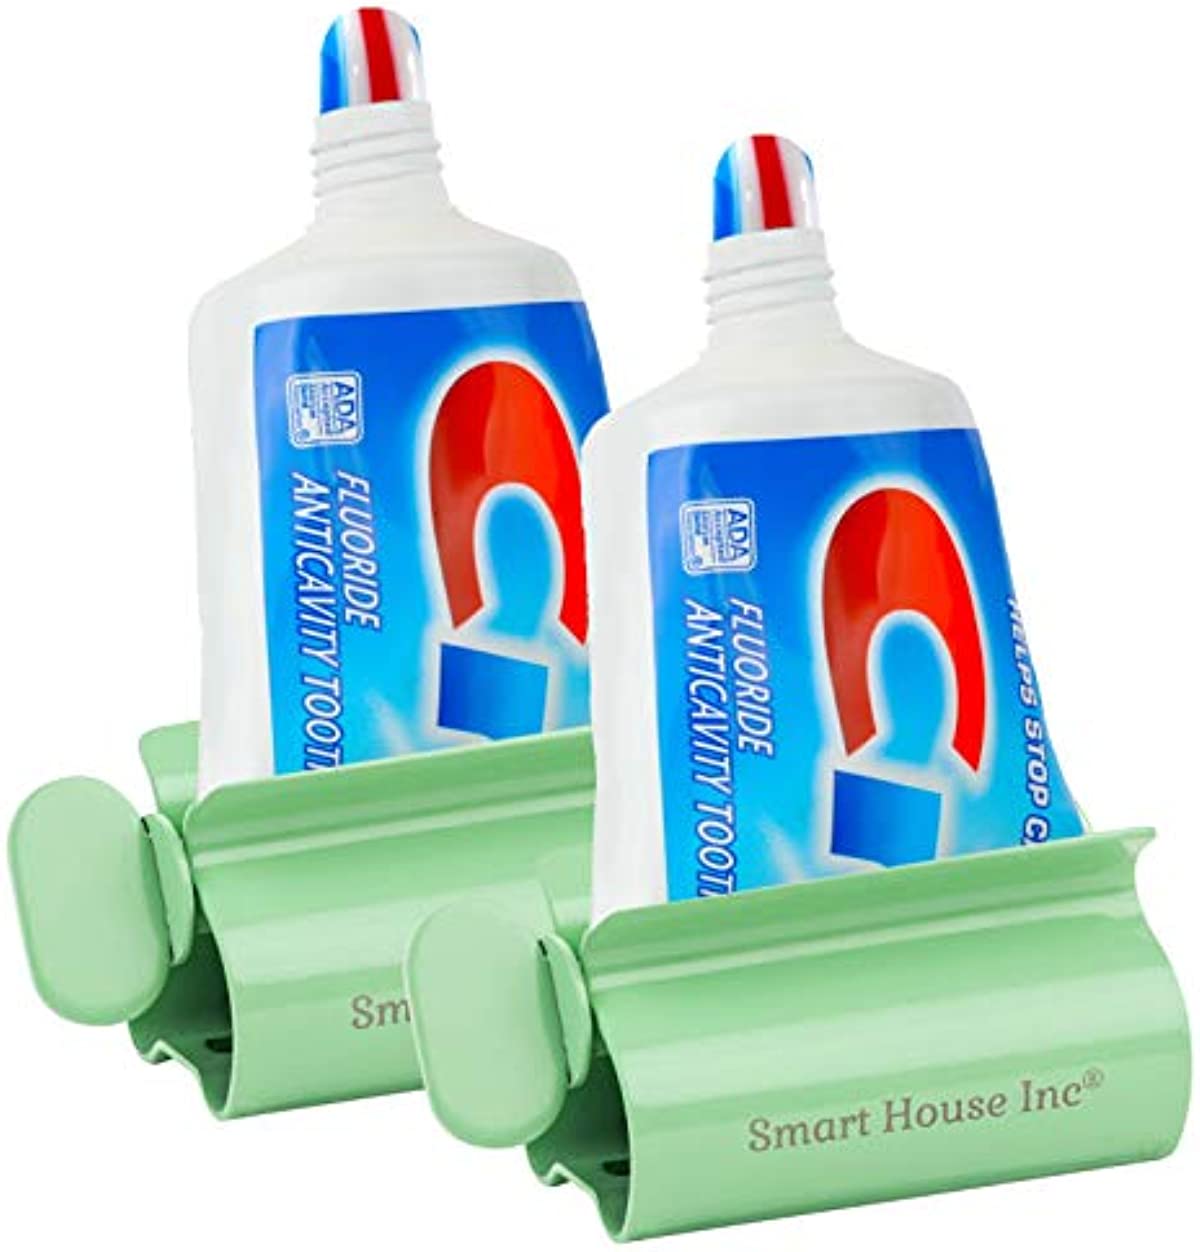 Toothpaste Squeezer Tube Roller Stainless Steel Tube Squeezer Rollers, Saves Toothpaste, Creams, Puts an end to Waste (Green)